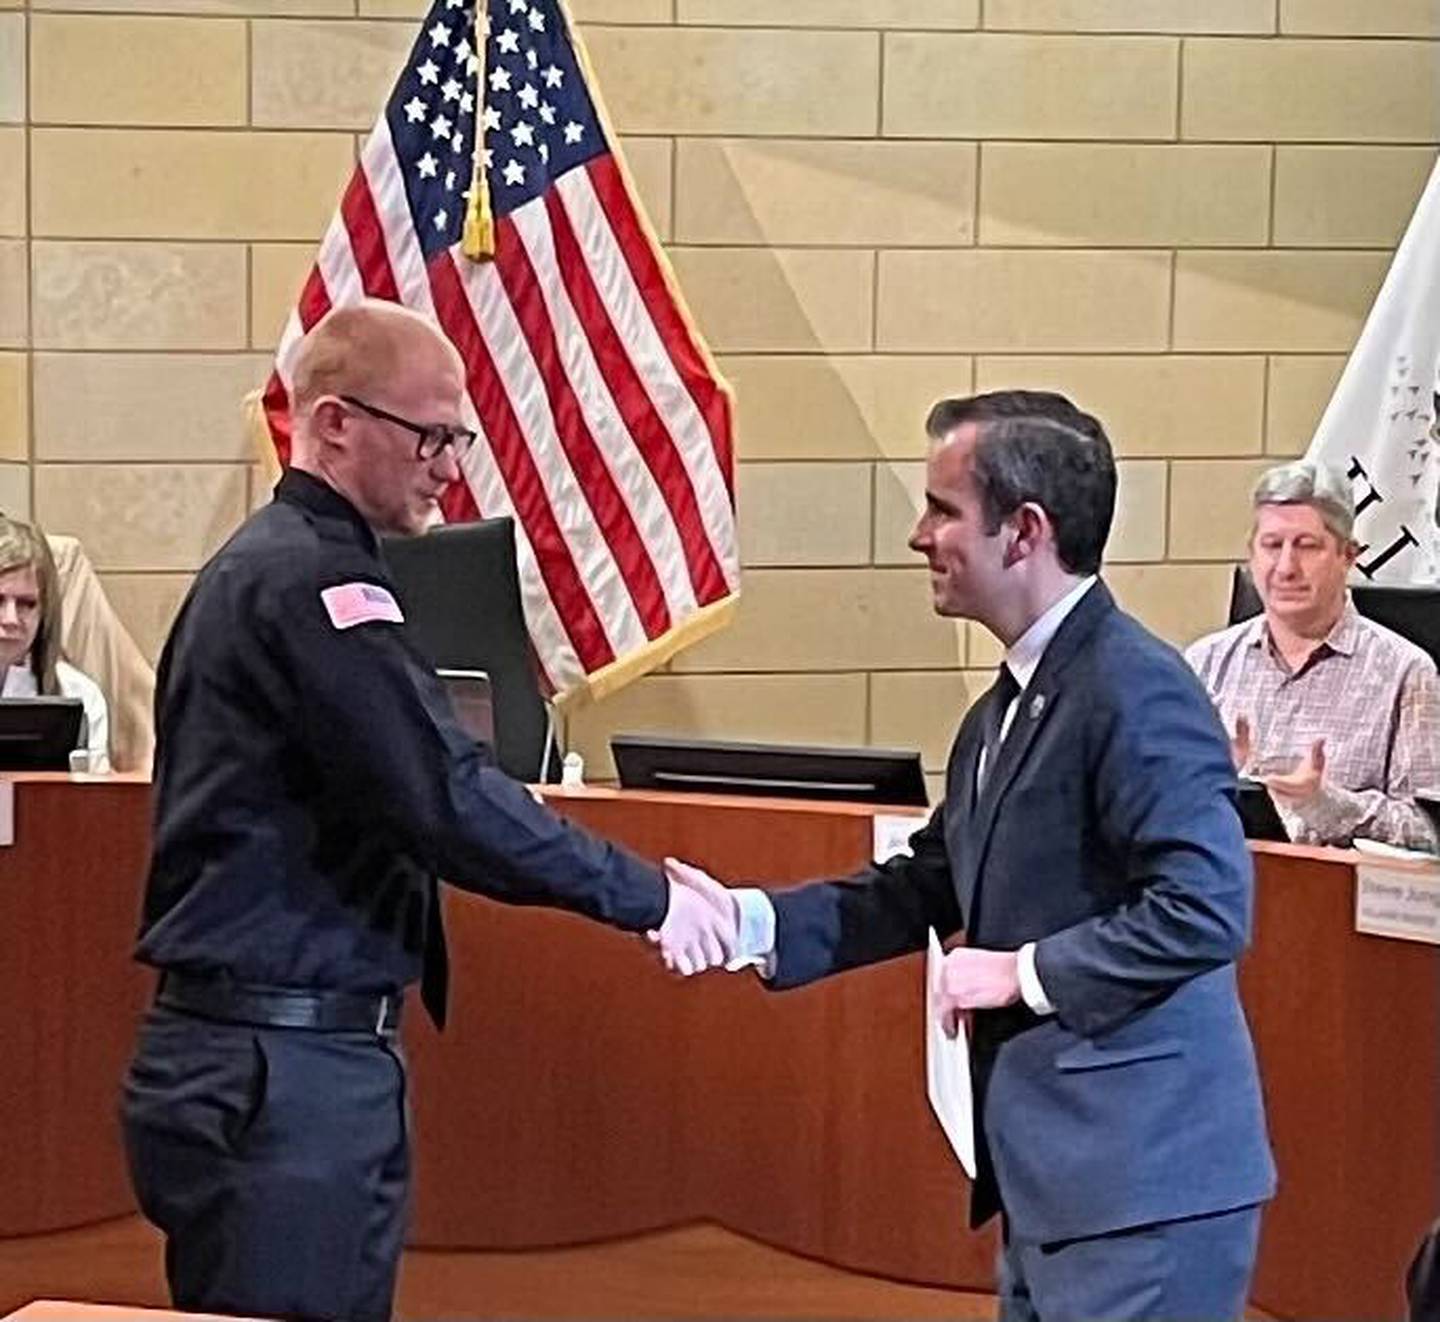 Montgomery Village President Matt Brolley congratulates Caine Culver, left, on his swearing-in as a village police officer during a Village Board meeting Monday, Jan. 23, 2023. At far right is Jeff Zoephel, village administrator.